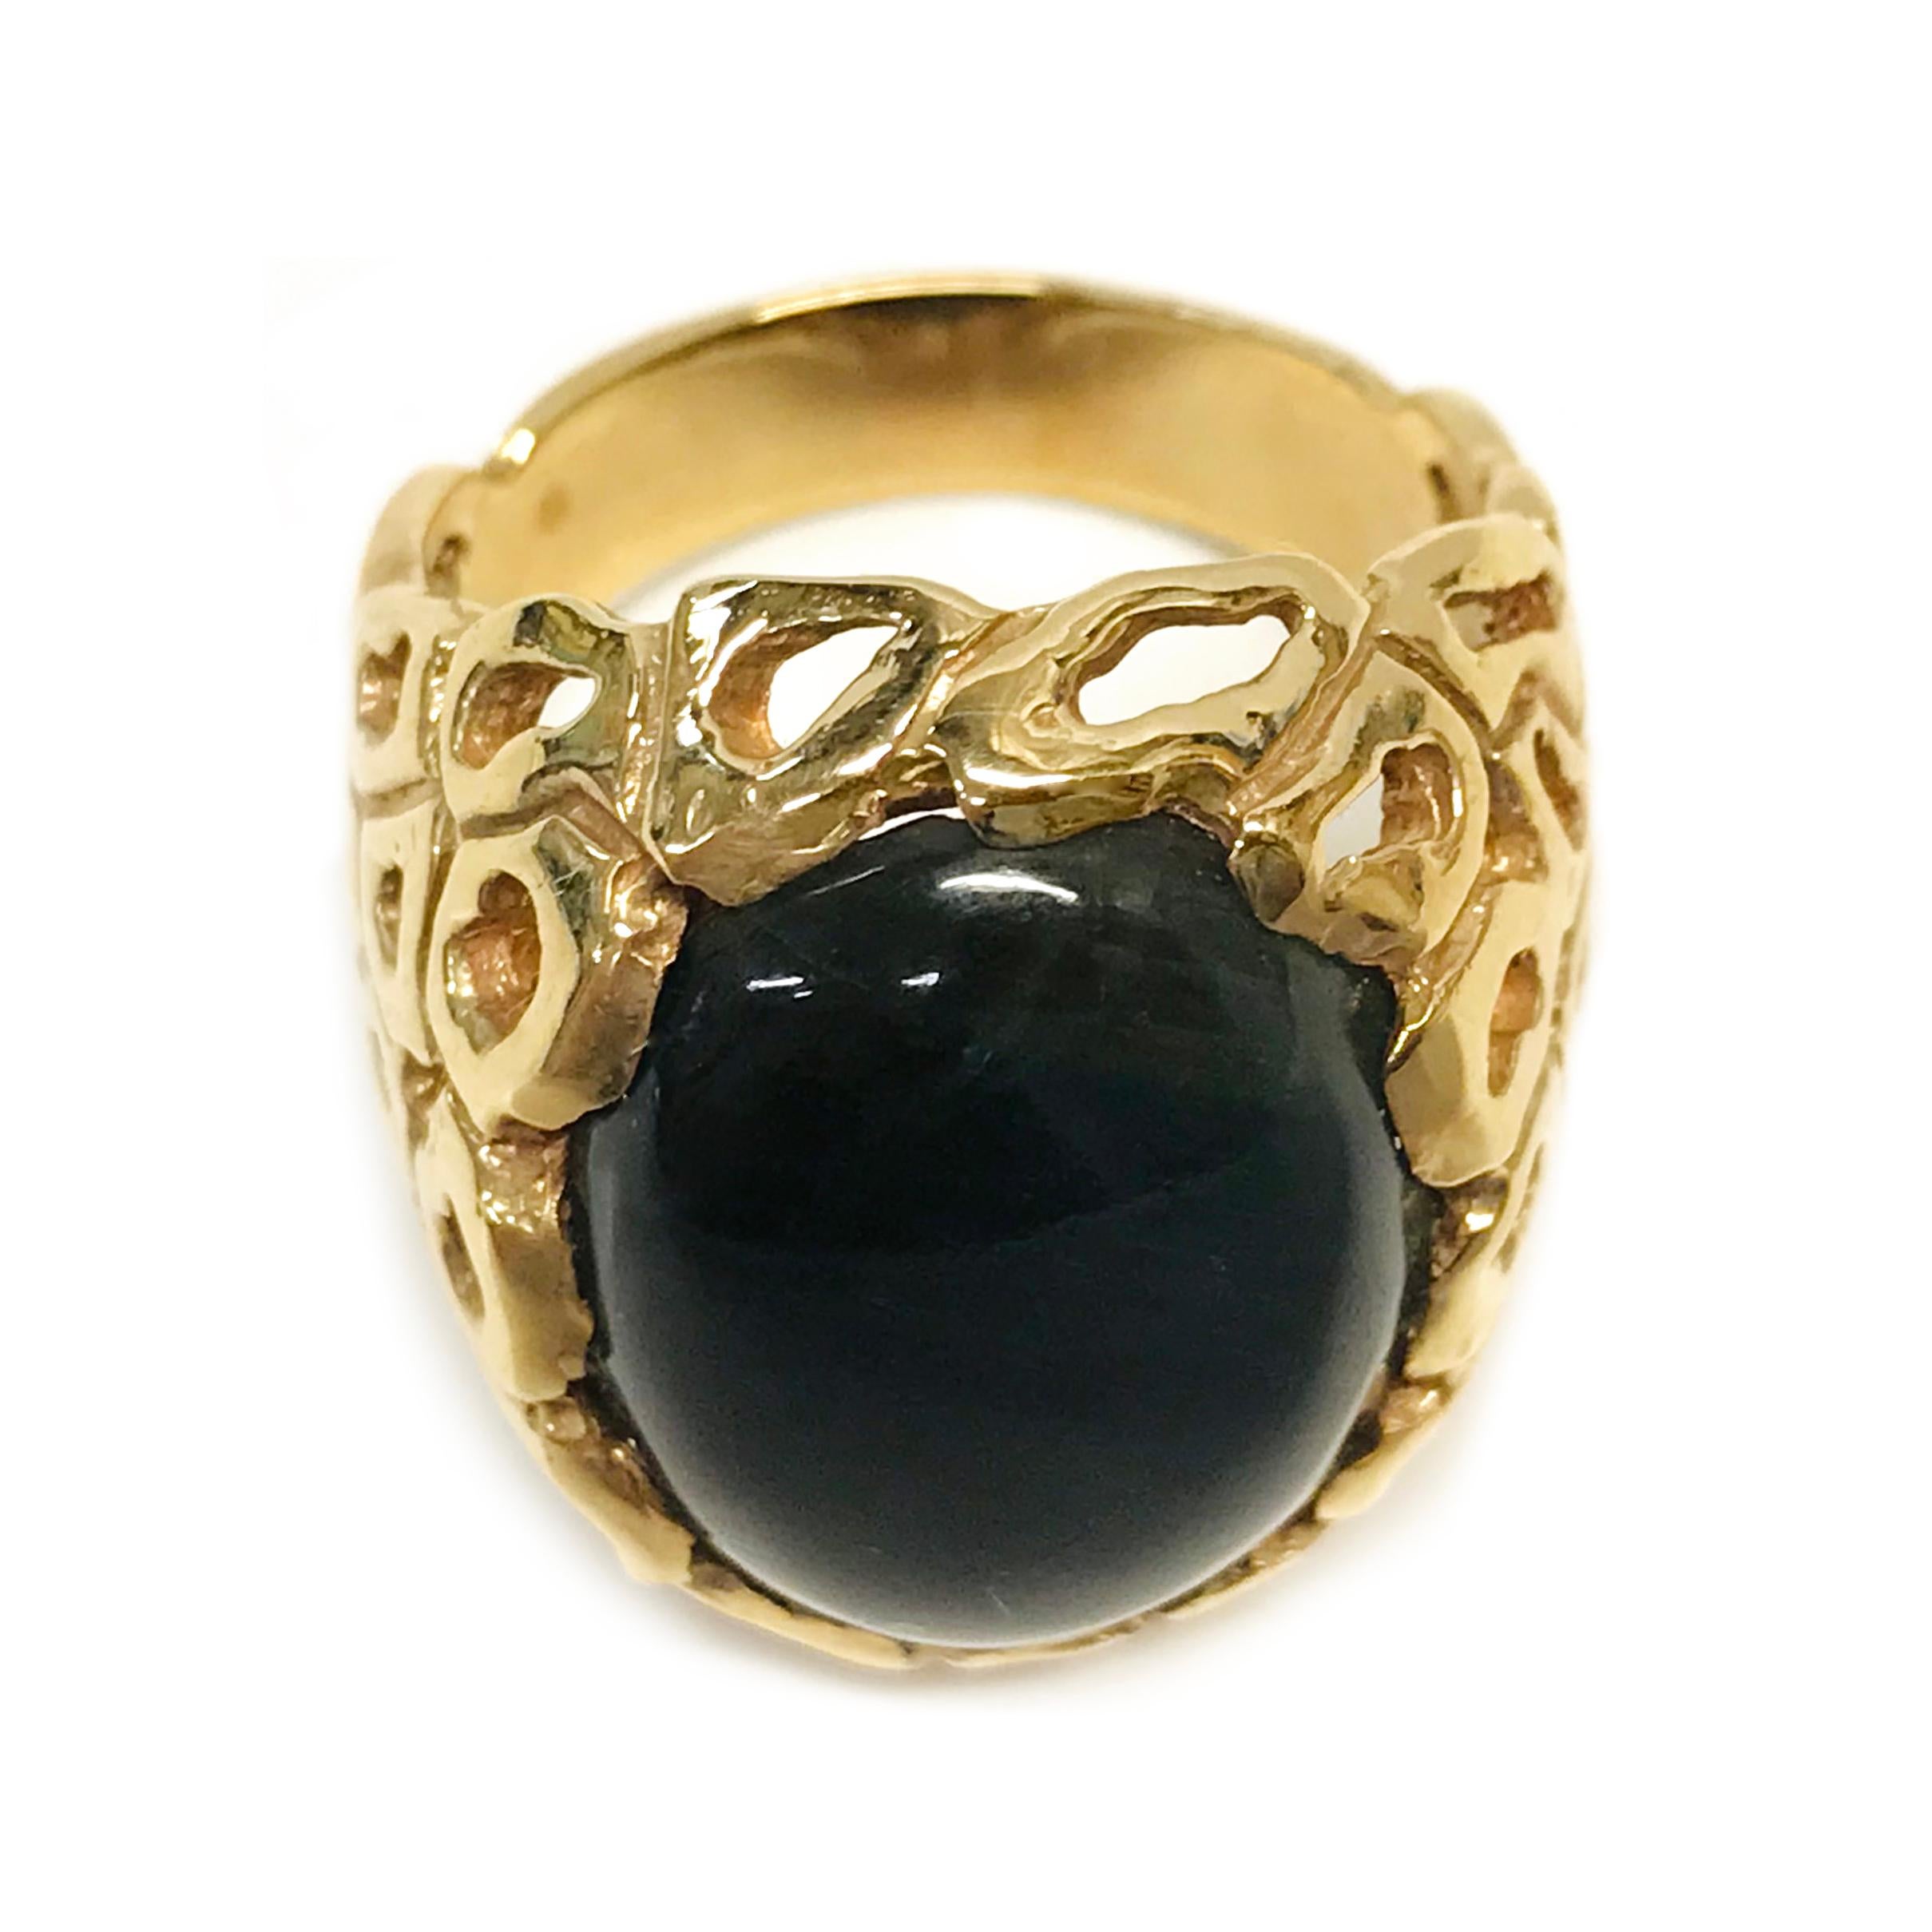 14 Karat Dyed Tiger's Eye Ring. The ring features a bezel-set oval dyed Tiger's Eye stone. The stone measures 19mm x 15.5mm and the ring size is 9. The majority of the ring band has free-form gold shapes with cutouts with a tapered solid band. The